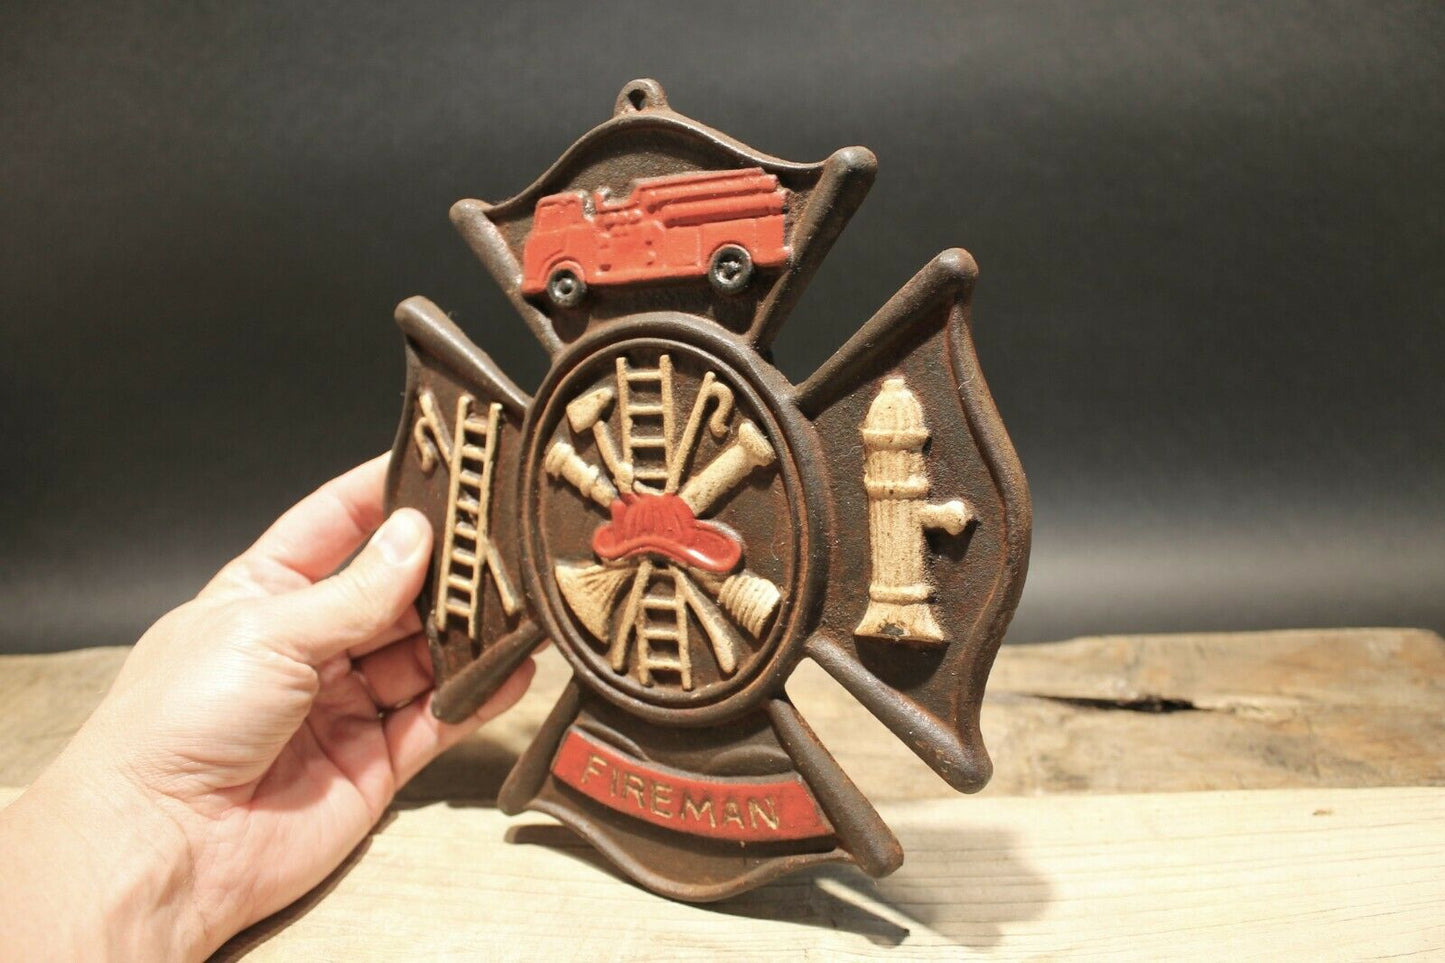 Antique Vintage Style Cast Iron Fire Fighter Plaque Fire Mark Sign - Early Home Decor